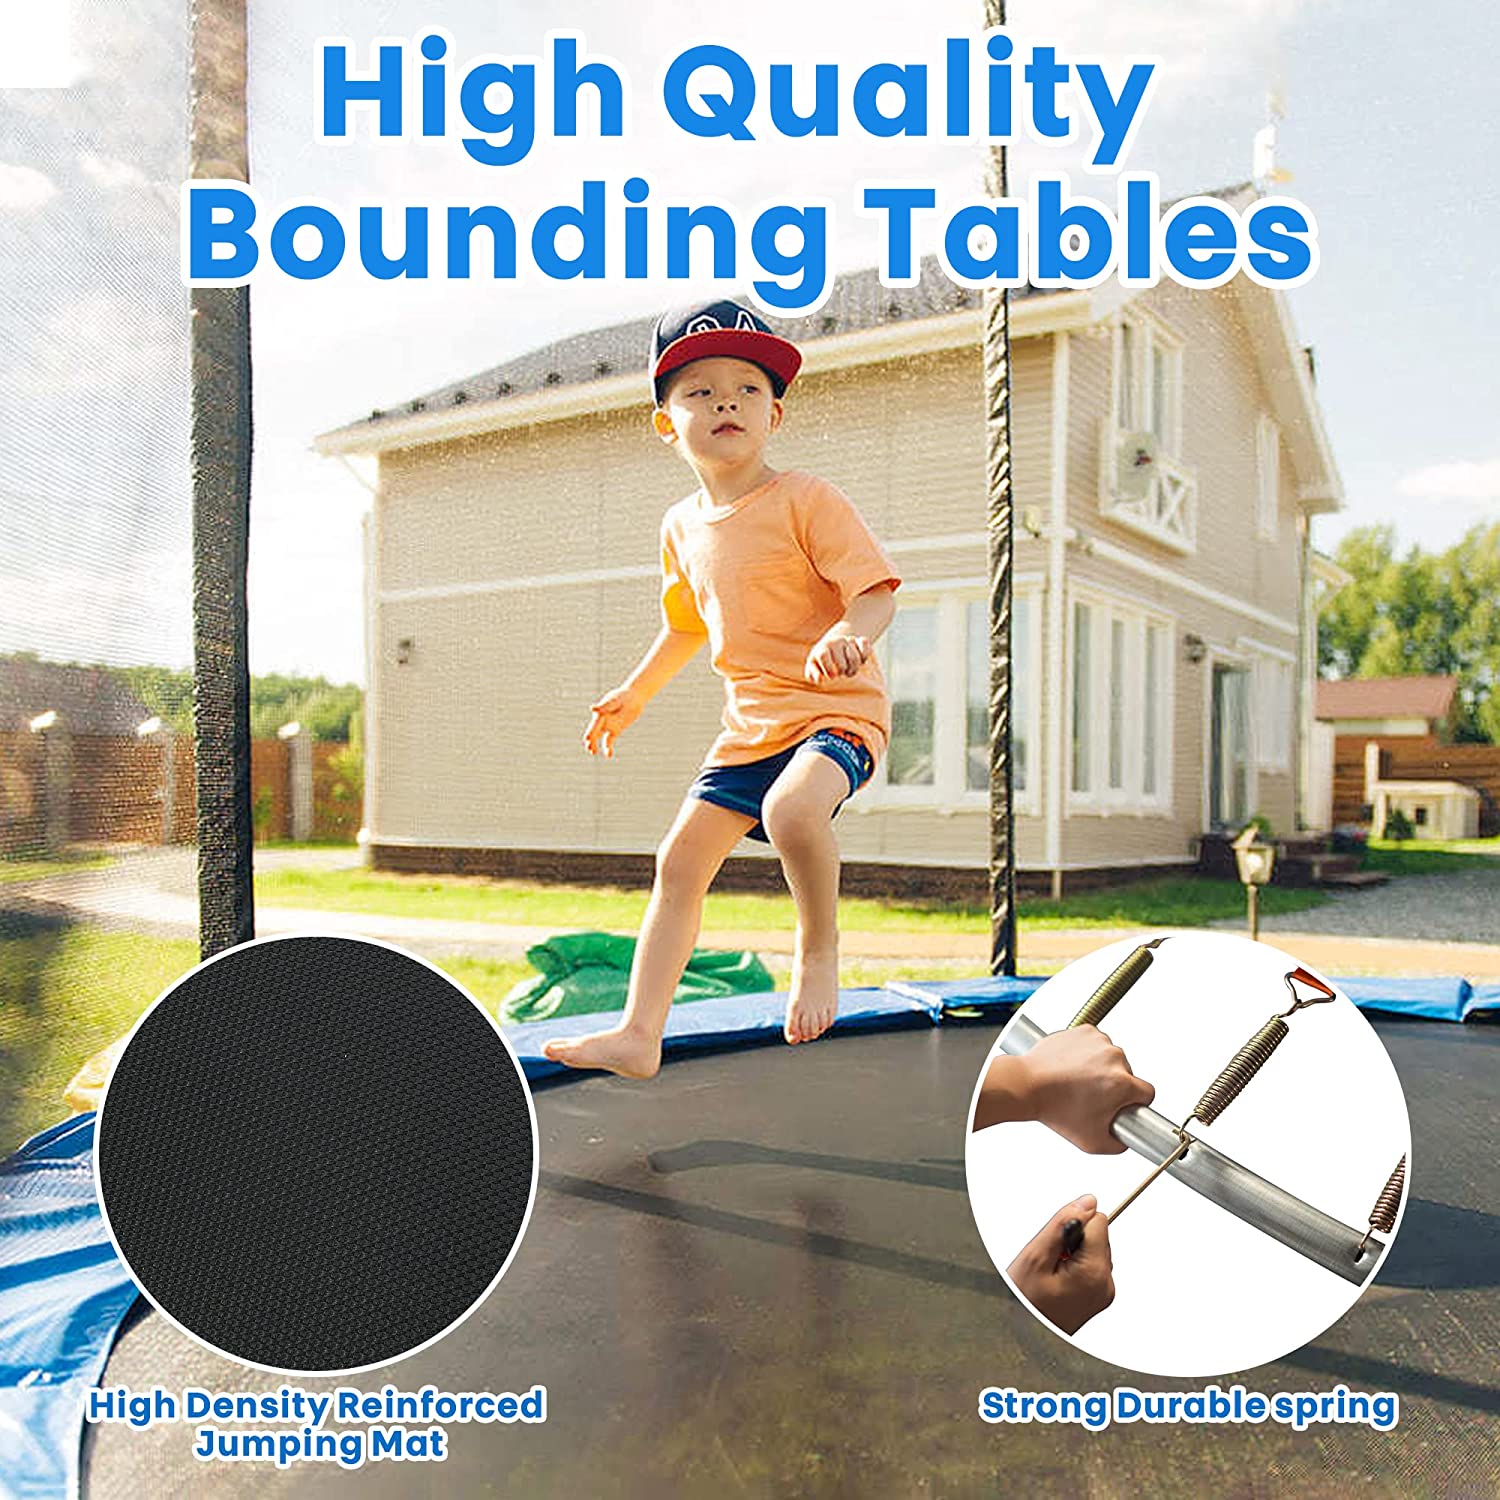 8FT Trampoline with Safety Enclosure Net and Ladder Bounding Table,Trampoline Combo Jumping Trampoline Fitness